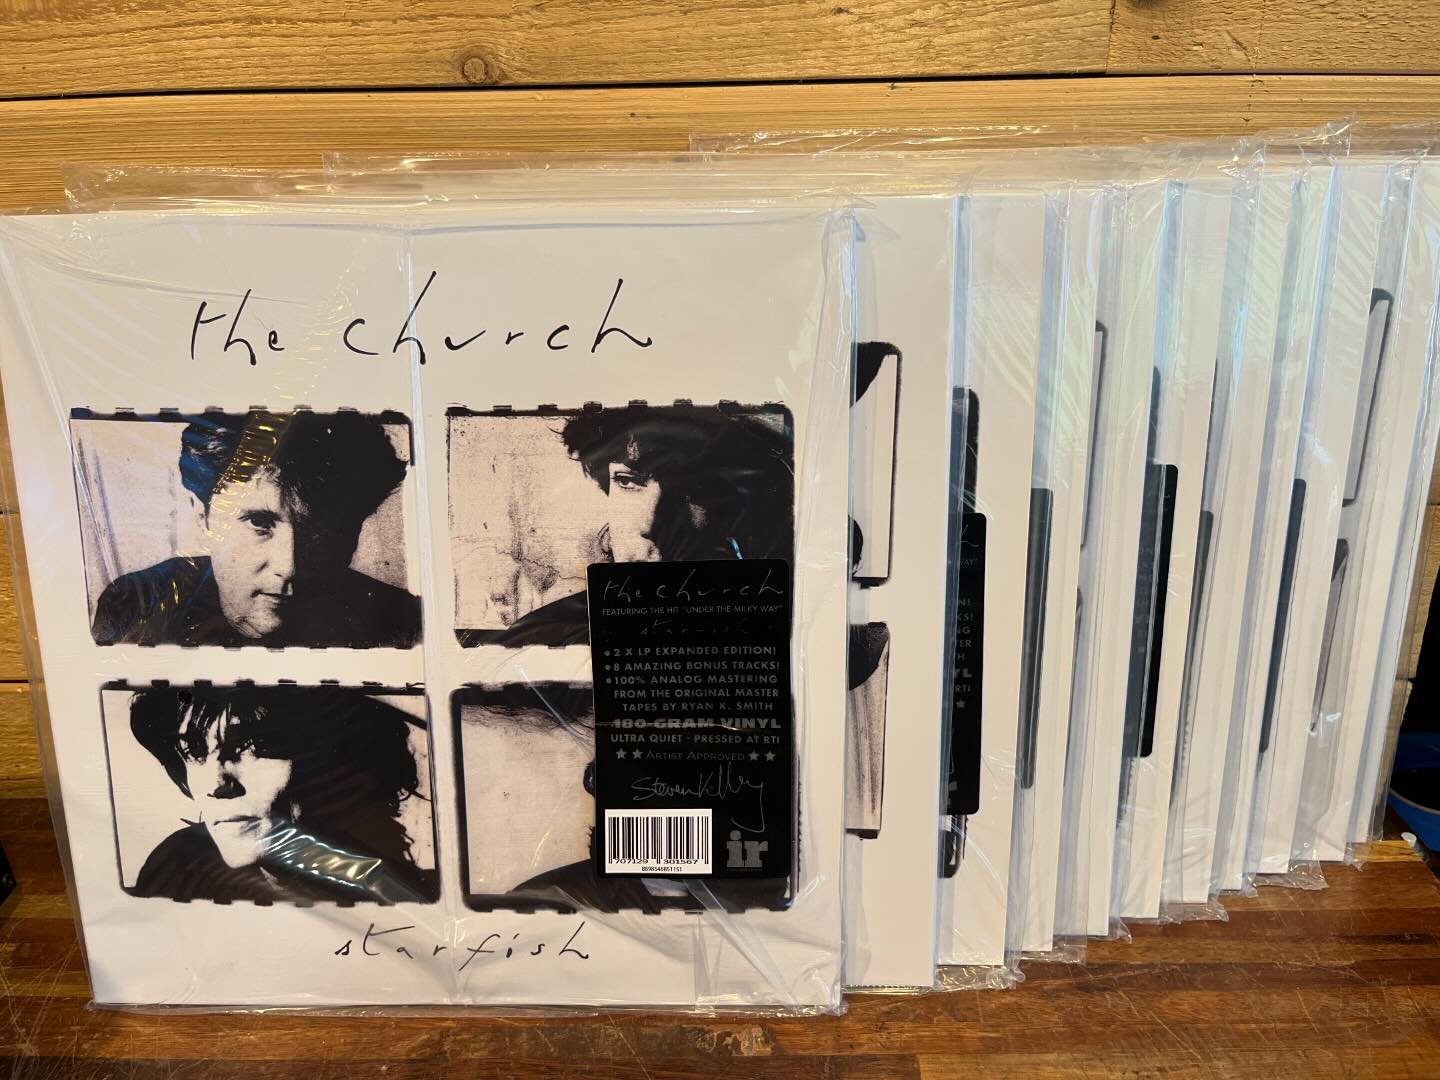 One of the best LPs around.  #thechurch #starfish #destination #underthemilkyway #stevekilbey #interventionrecords @intervention_records 2 LP ONE HUNDRED percent analog mastering from the original master tapes.  #rti #ultraquiet